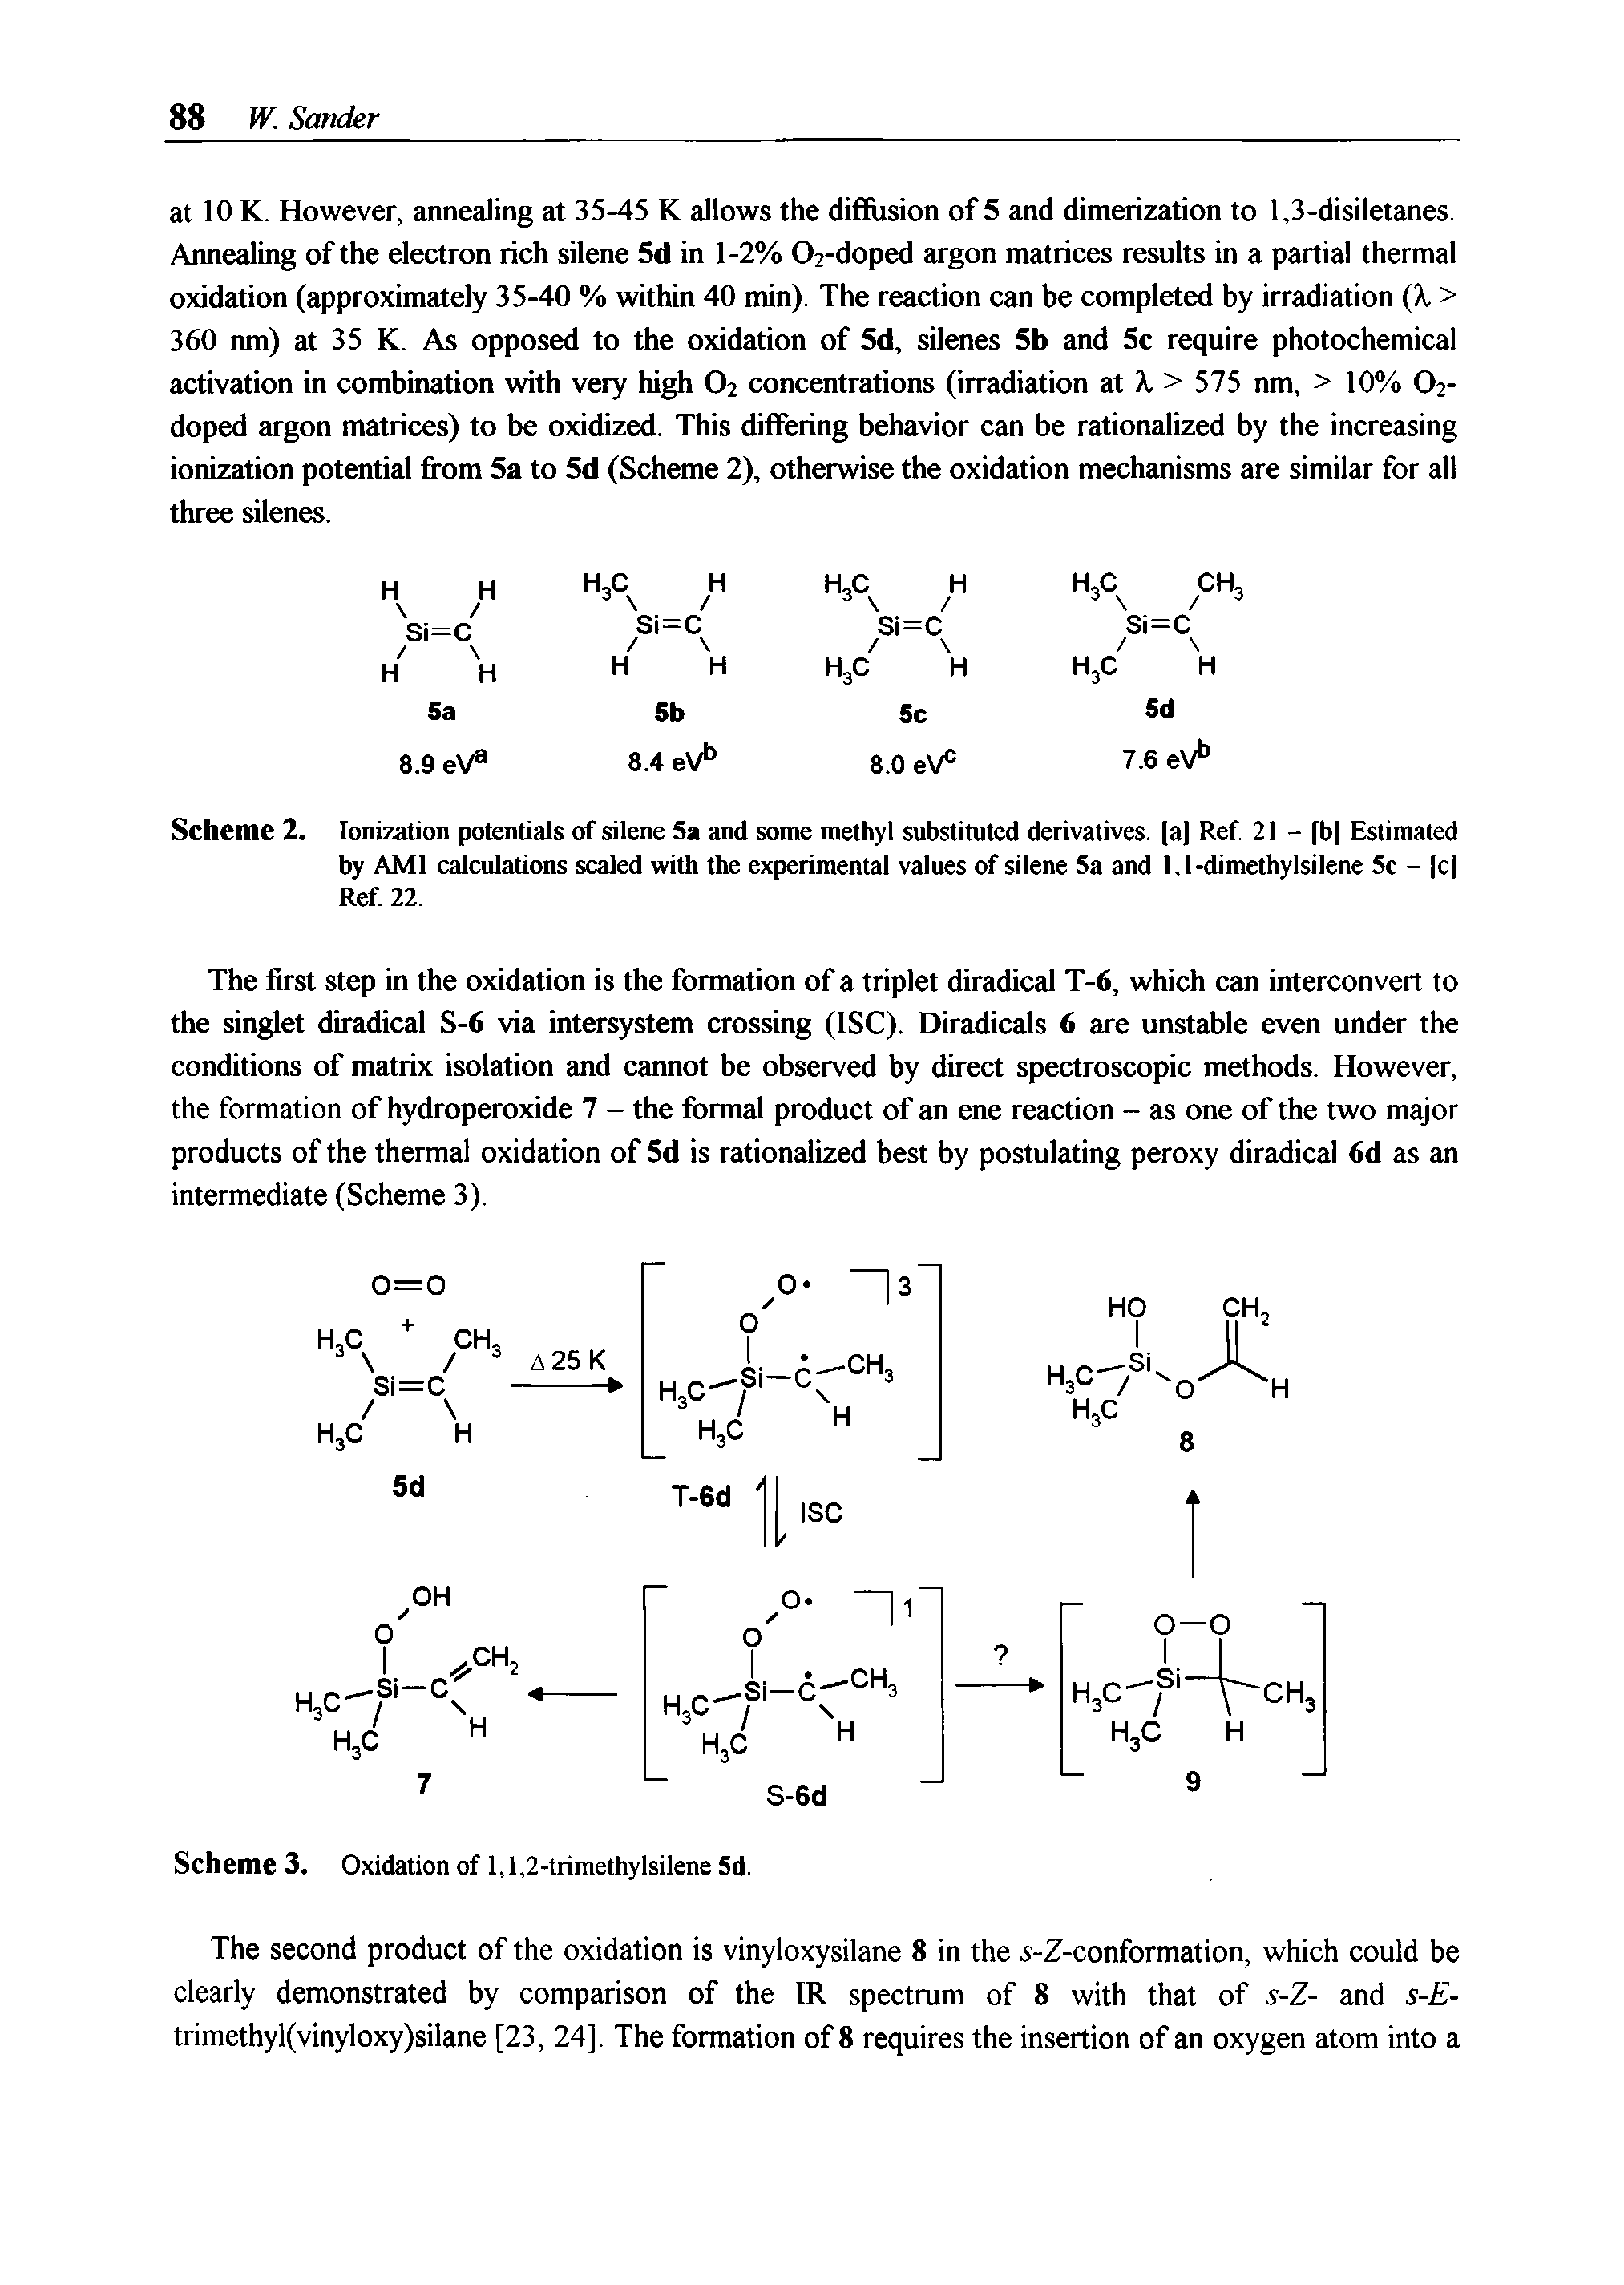 Scheme 2. Ionization potentials of silene Sa and some methyl substituted derivatives. a Ref 21 - fb Estimated by AMI calculations scaled with the experimental values of silene Sa and l.l-dimethylsilene Sc - c Ref 22.